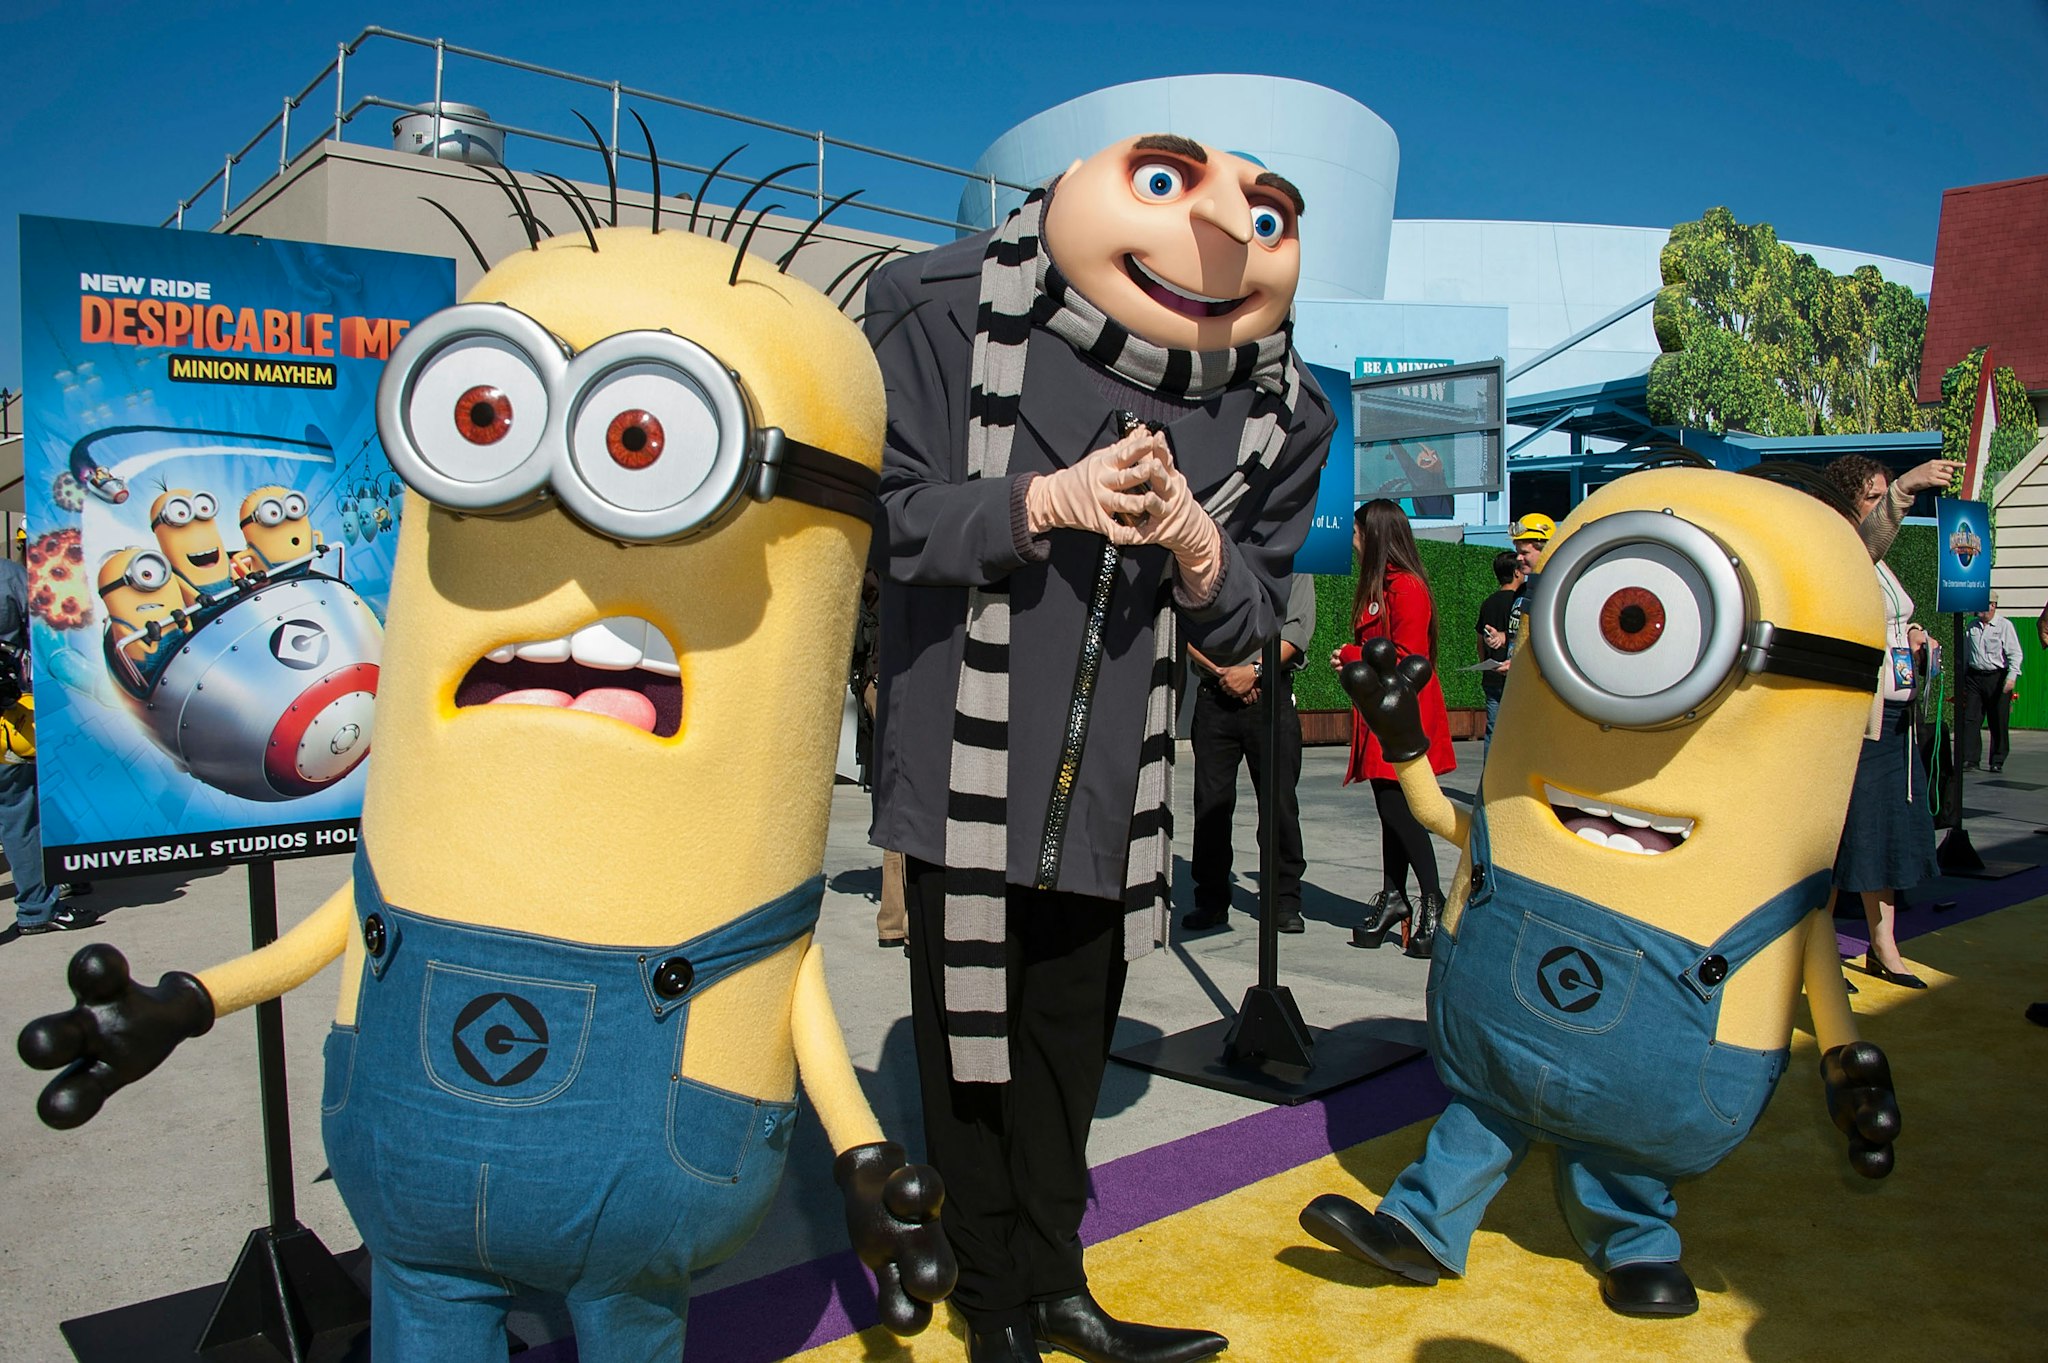 Gru and his Minion attends Universal Studios Hollywood Celebrates The Premiere Of New 3D Ultra HD digital Animation Adventure "Despicable Me Minion Mayhem" at Universal Studios Hollywood on April 11, 2014 in Universal City, California. (Photo by Valerie Macon/Getty Images)